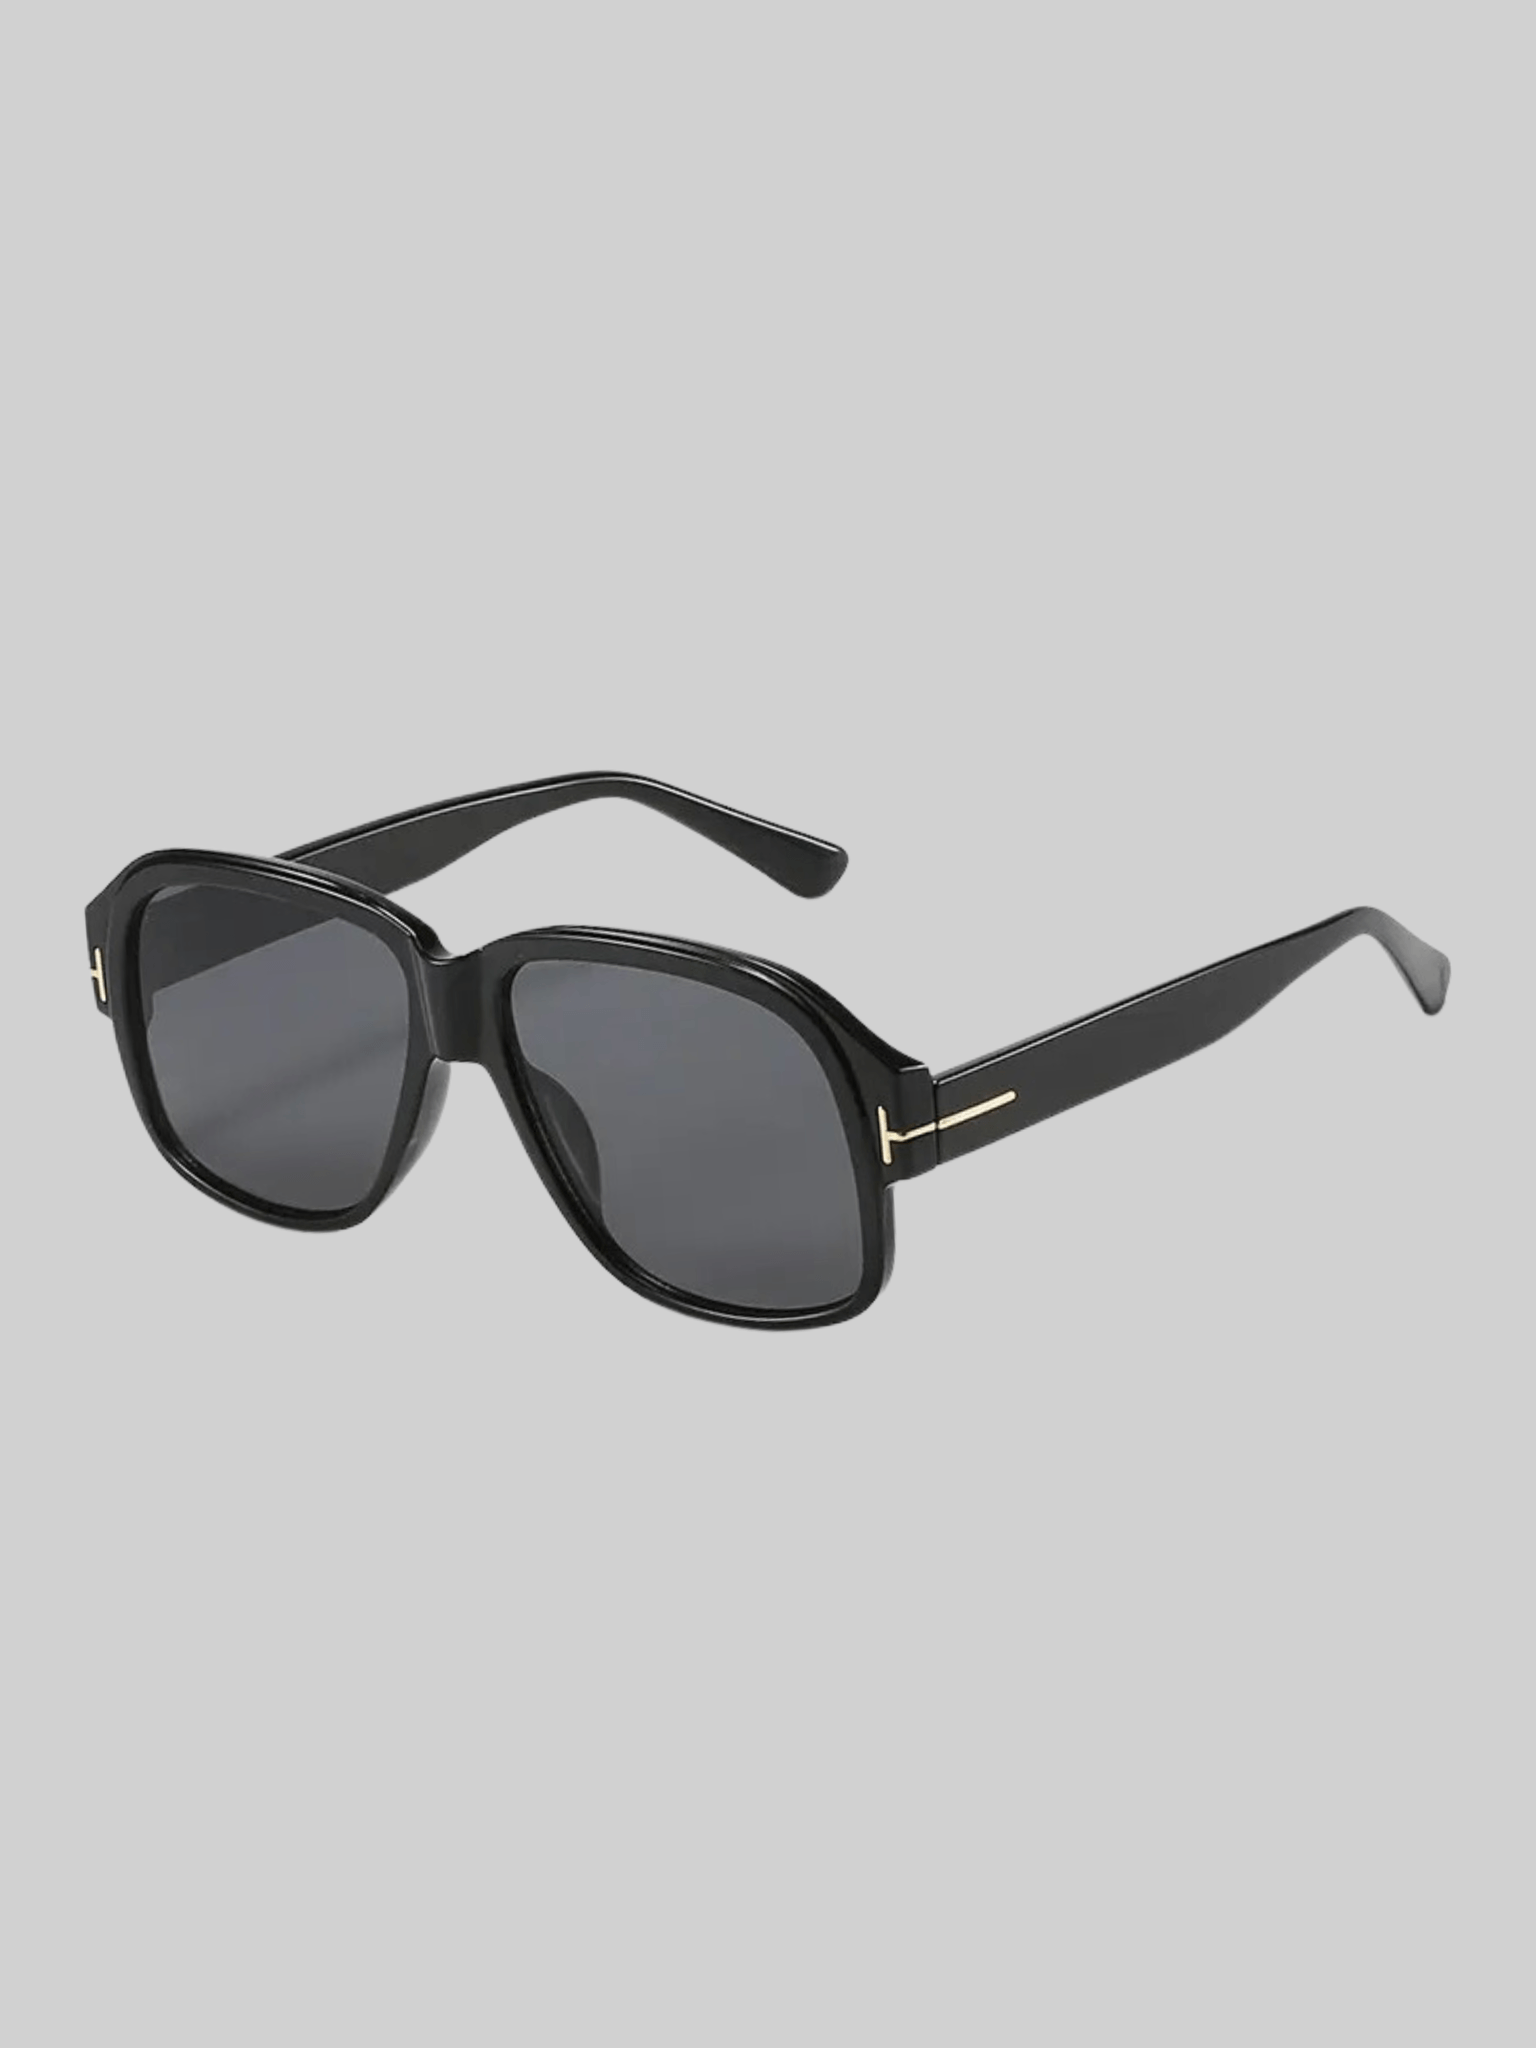 Holland Sunglasses - Vamp Official